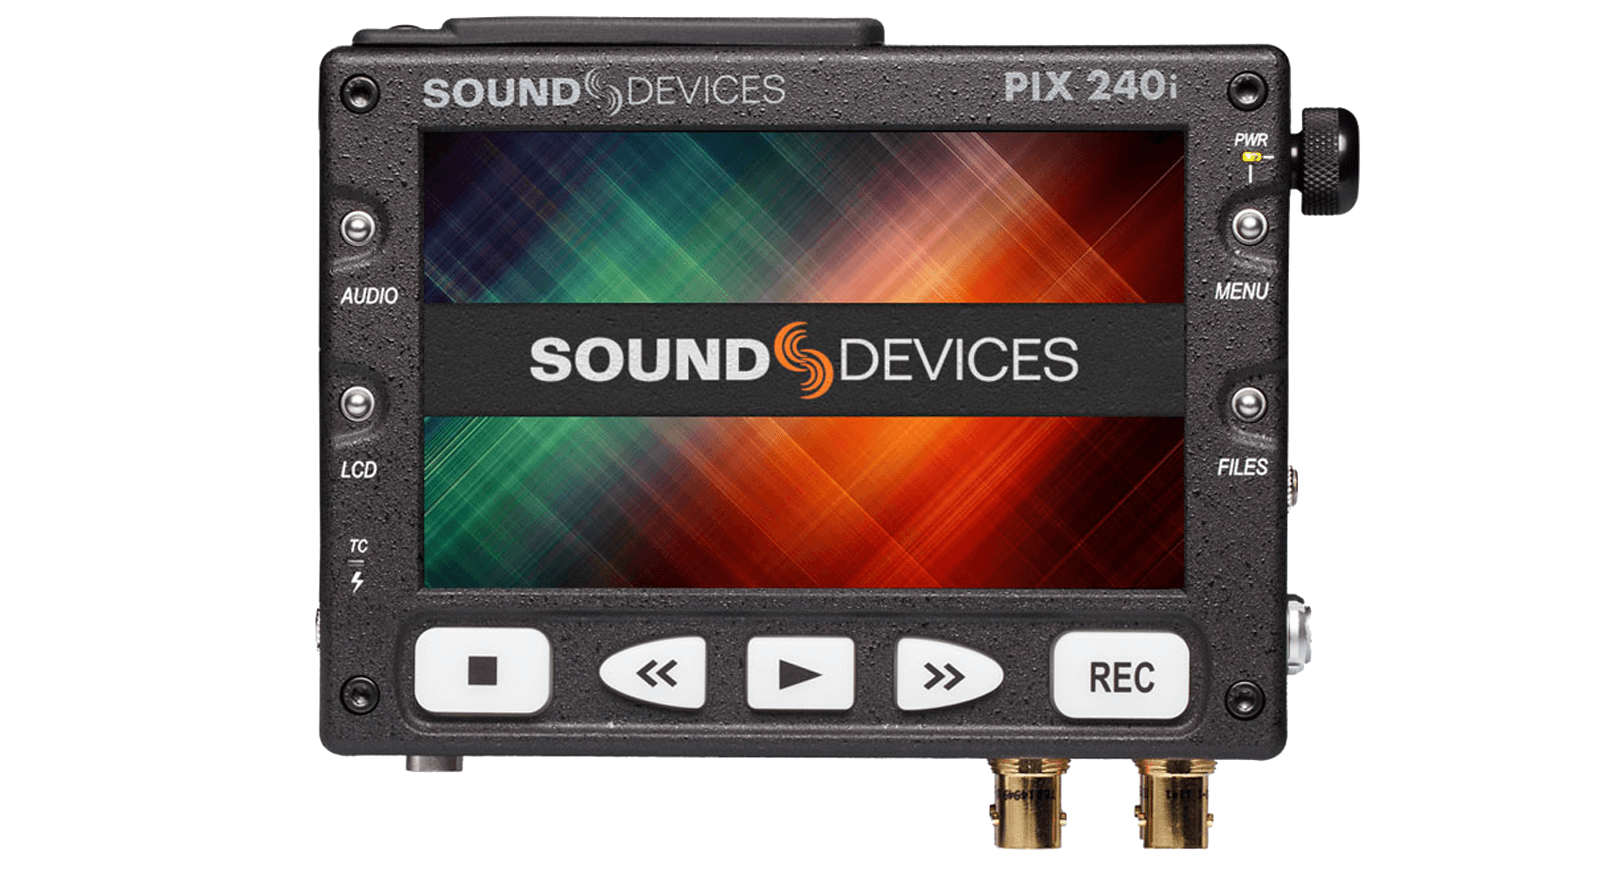 SoundDevices PIX240I portable video recorder